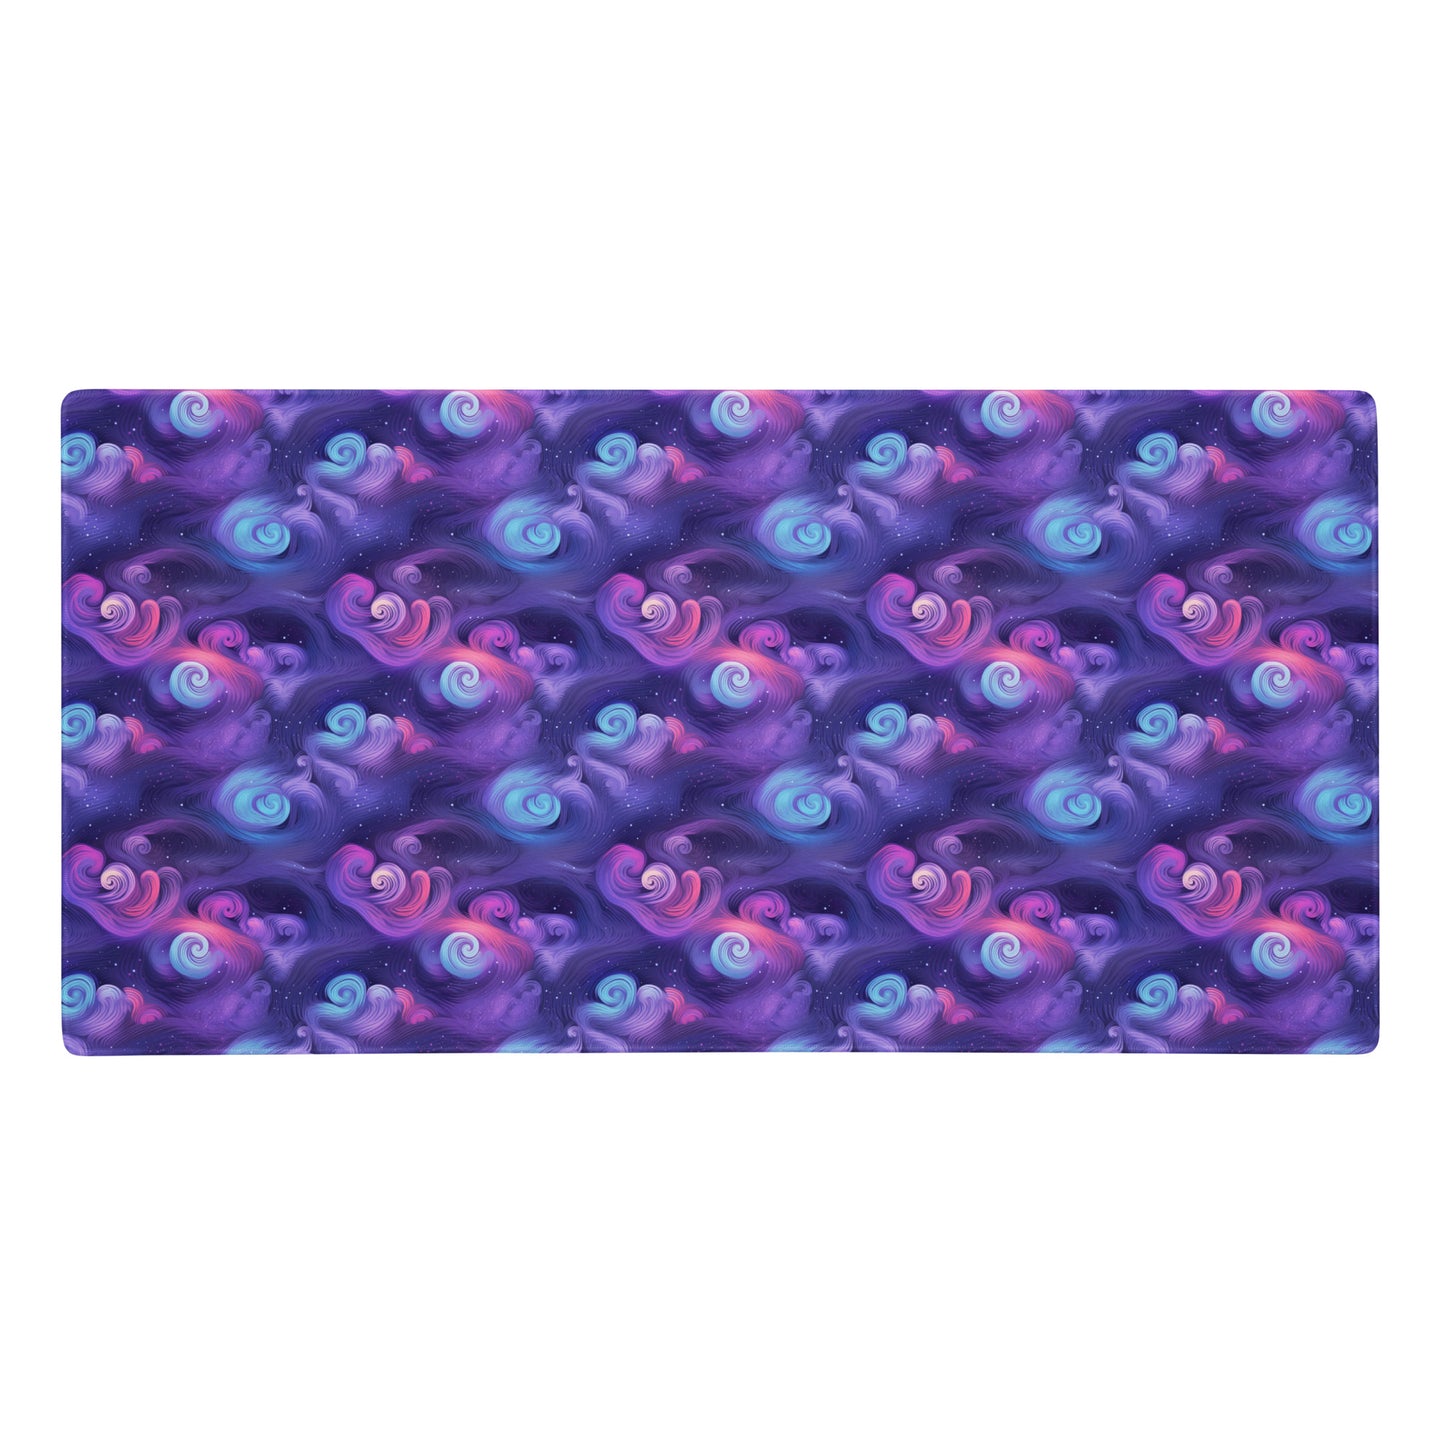 A 36" x 18" desk pad with fluffy clouds and stars on it. Blue and Purple in color